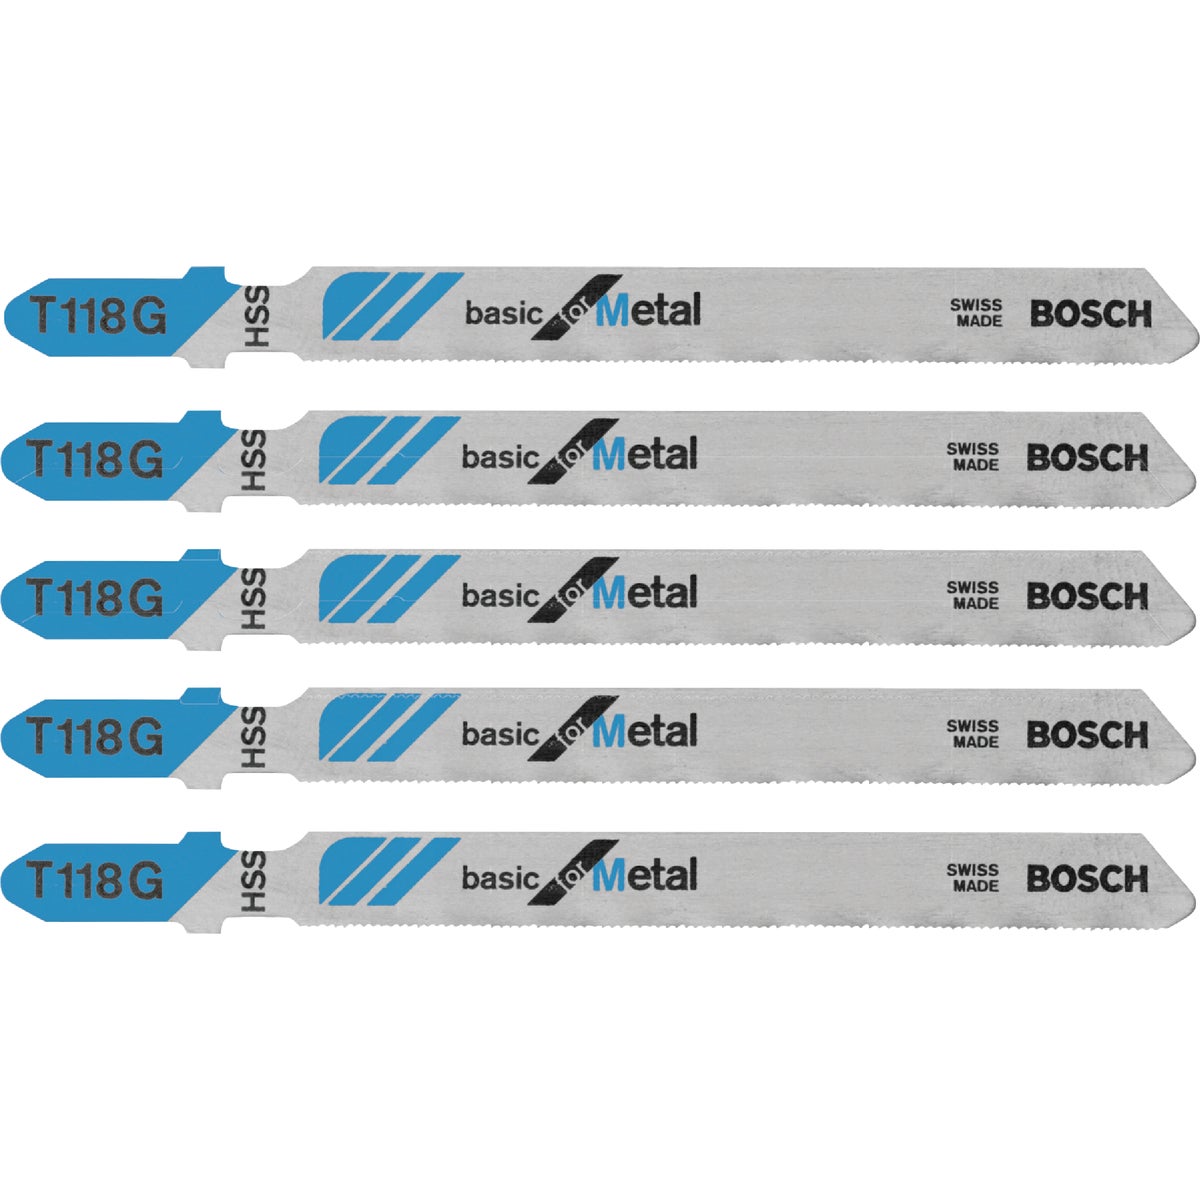 Bosch T-Shank 3-5/8 In. x 36 TPI High Speed Steel Jig Saw Blade, Basic for Metal (5-Pack)